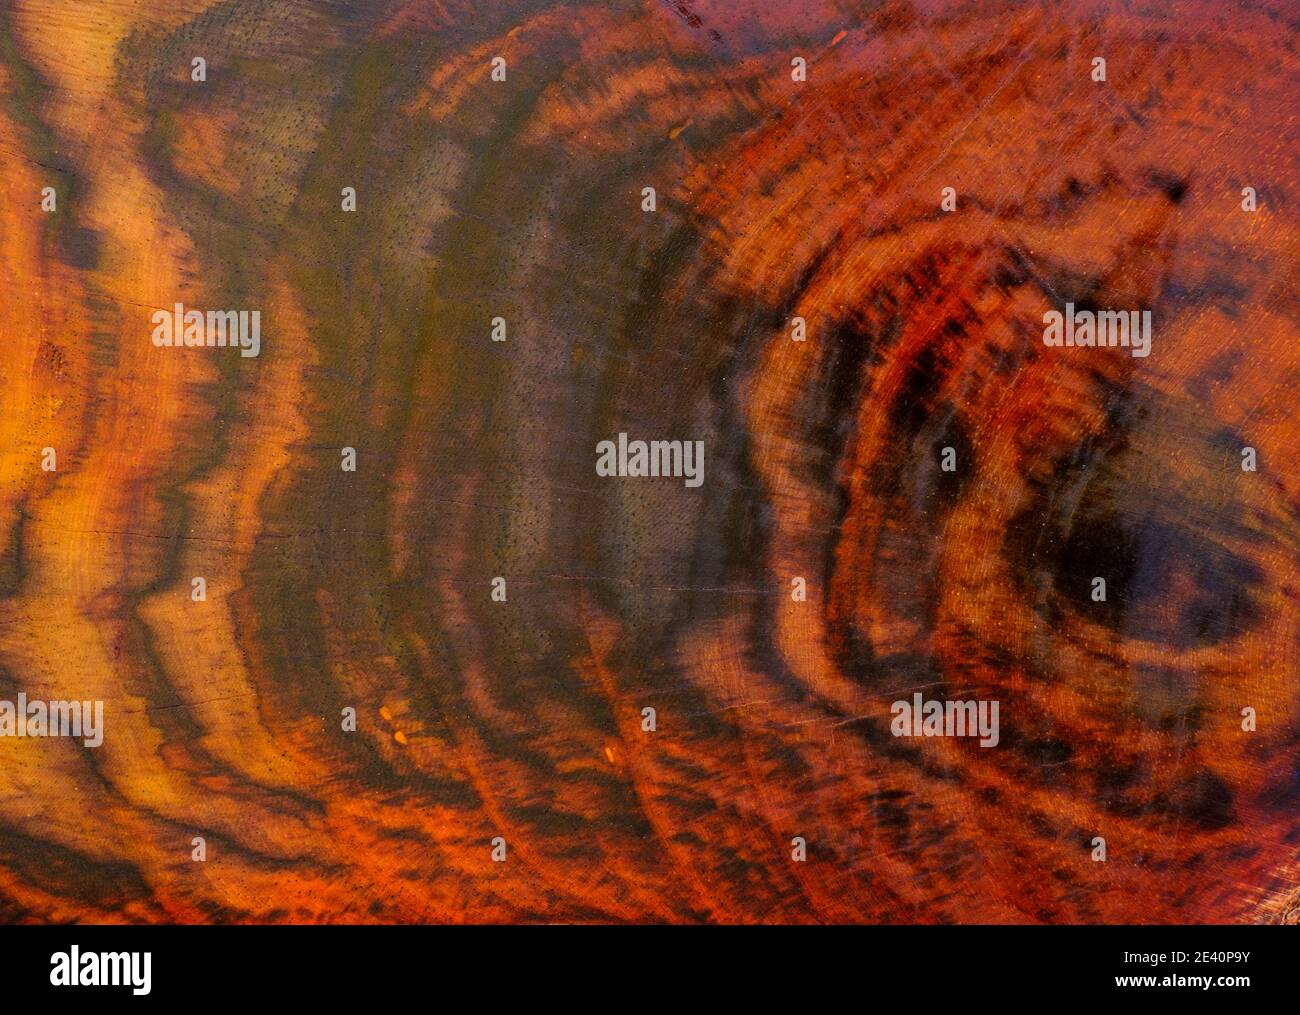 Rosewood tree rings texture background surface with natural pattern Stock Photo